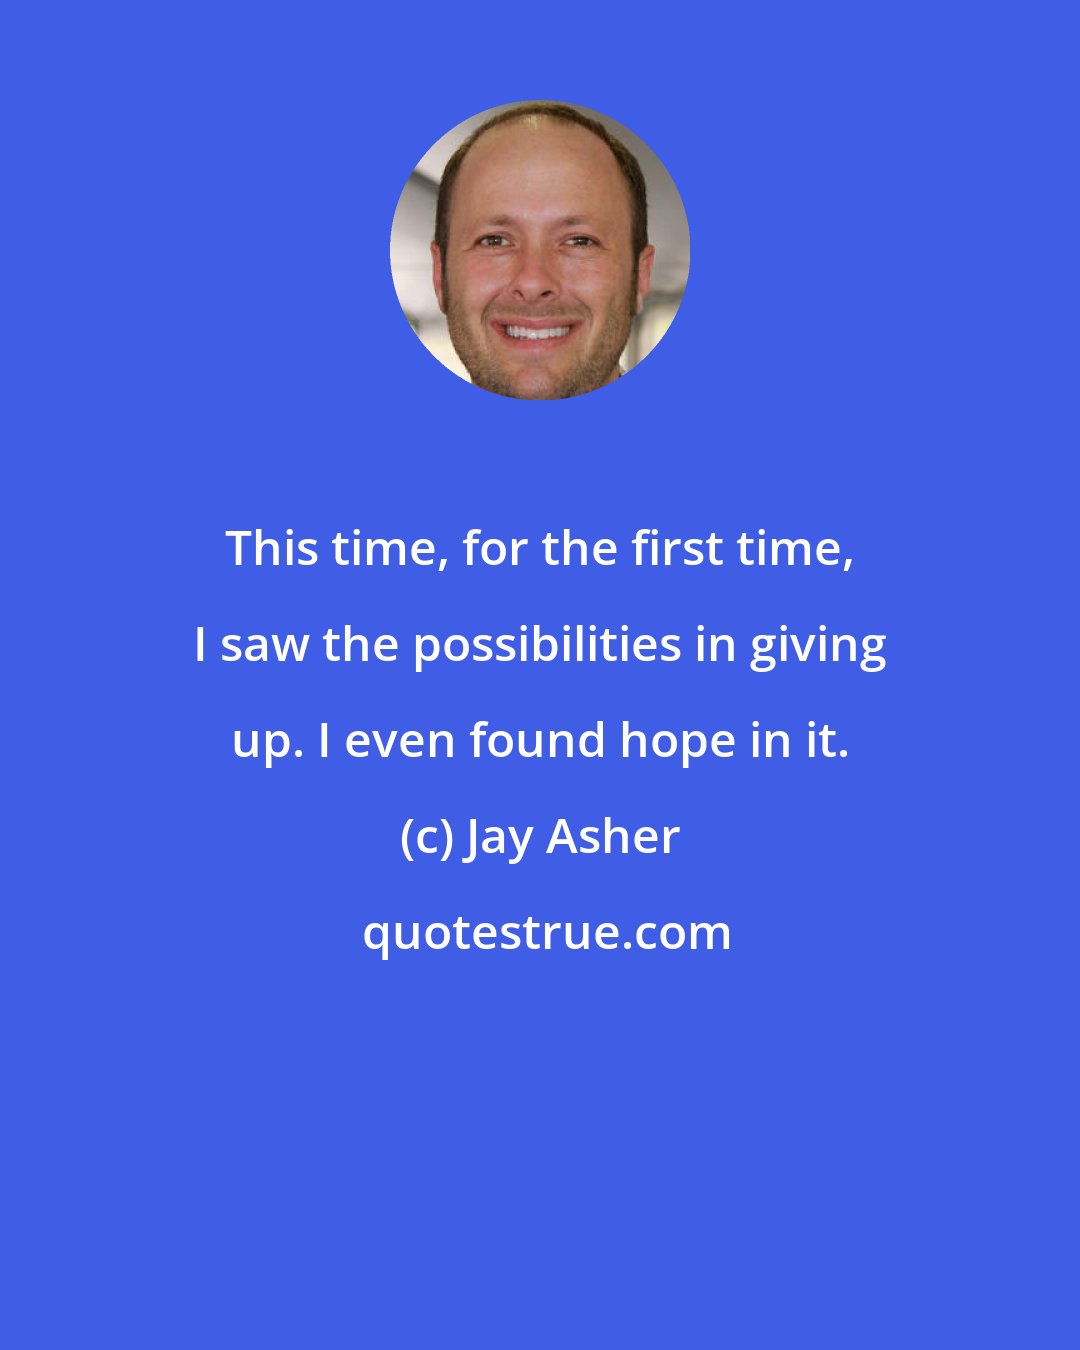 Jay Asher: This time, for the first time, I saw the possibilities in giving up. I even found hope in it.